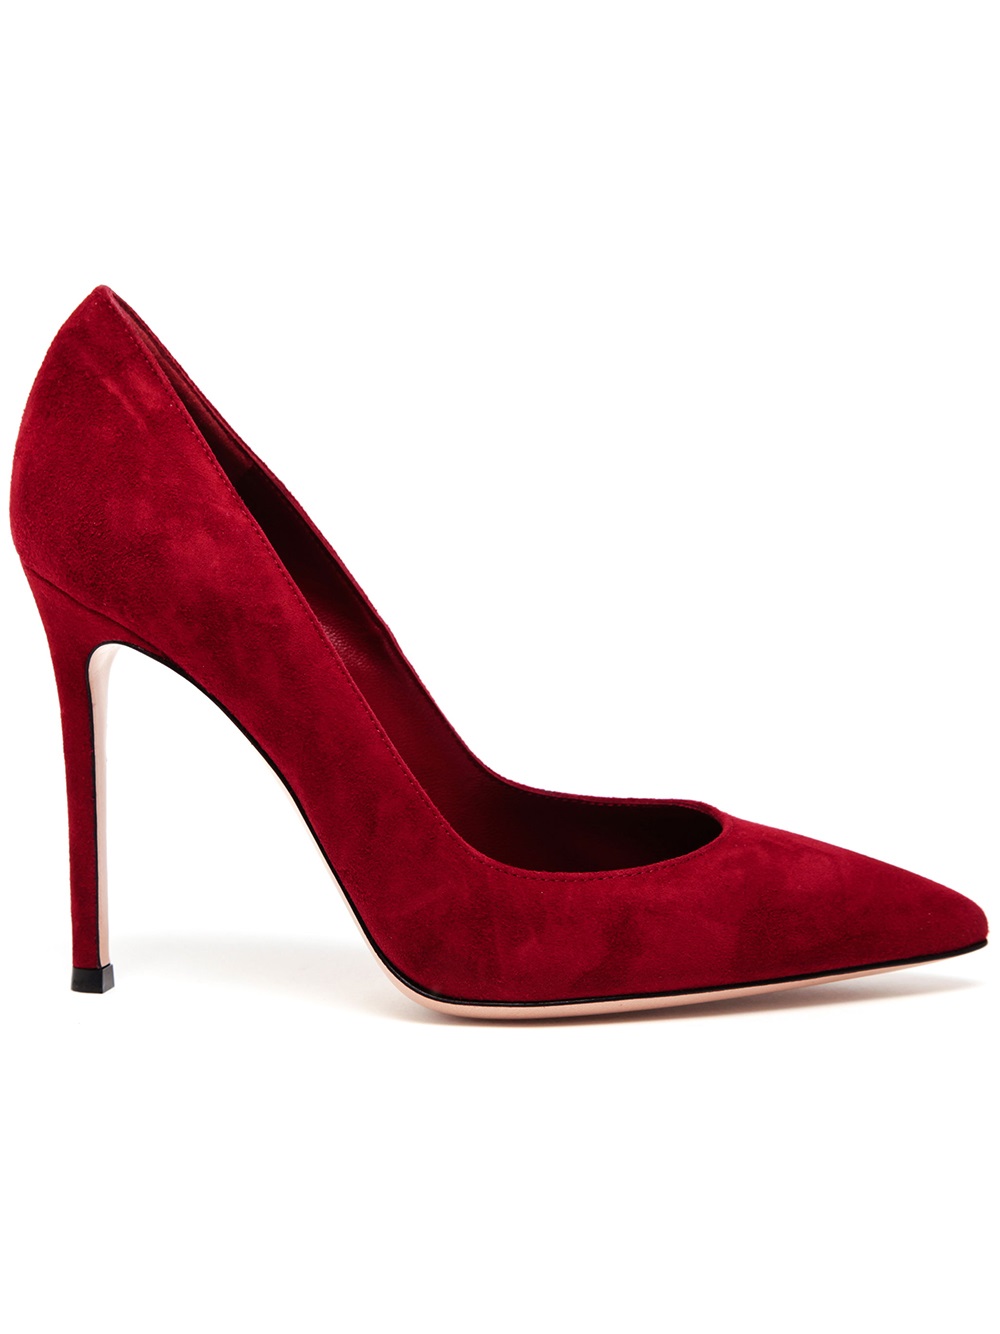 Lyst - Gianvito Rossi Suede Pointed Pumps in Red